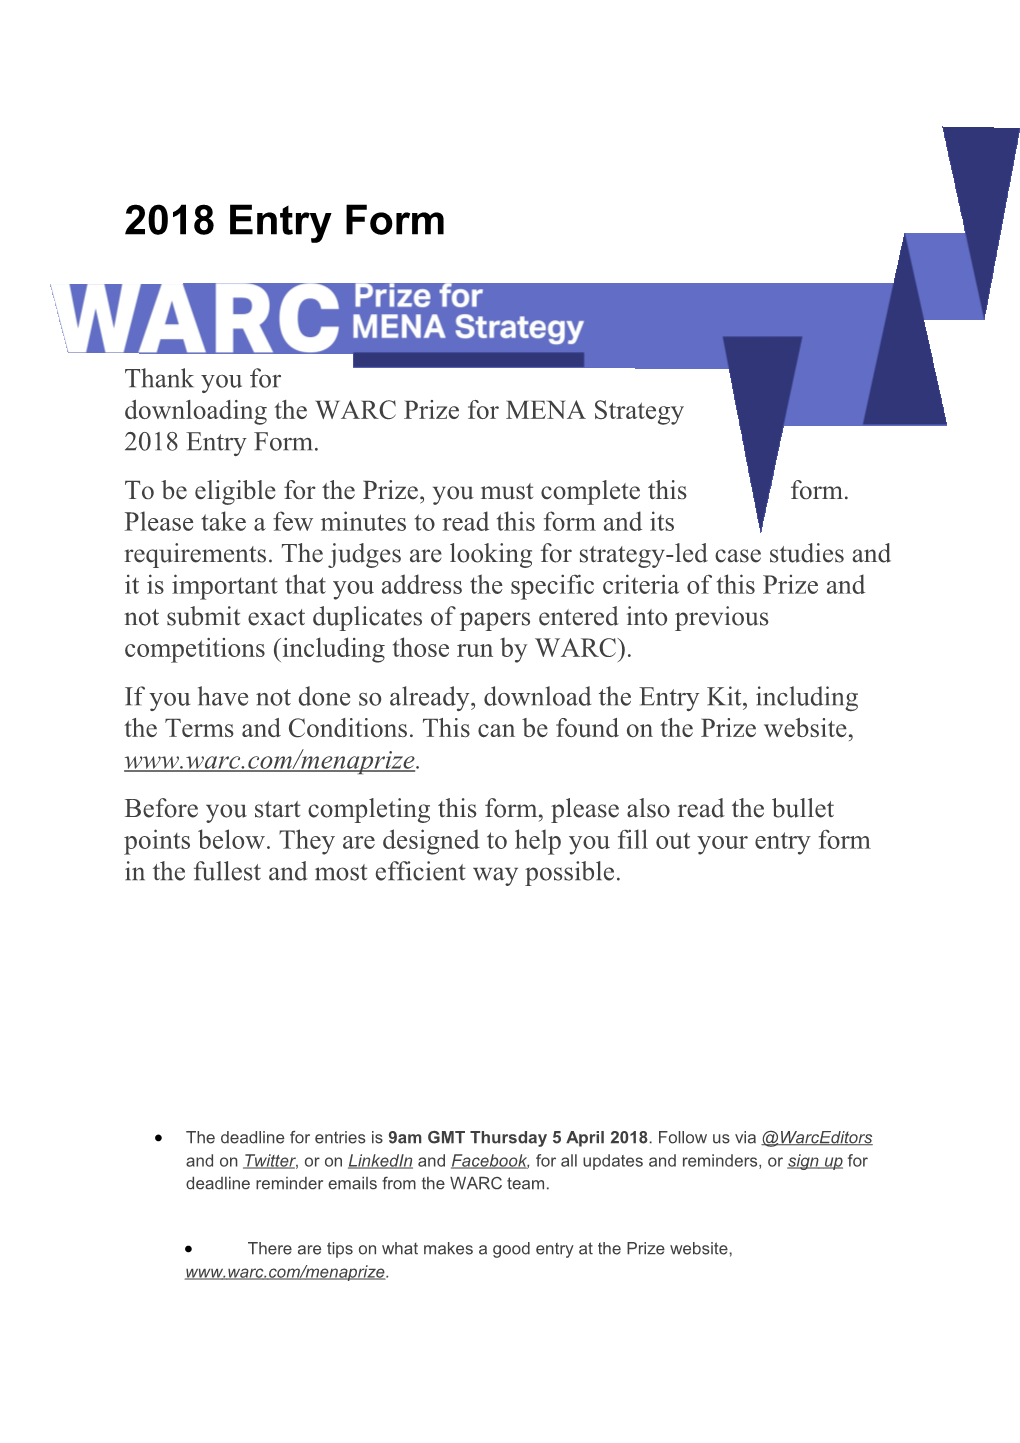 Thank You for Downloading the WARC Prize for MENA Strategy 2018 Entry Form